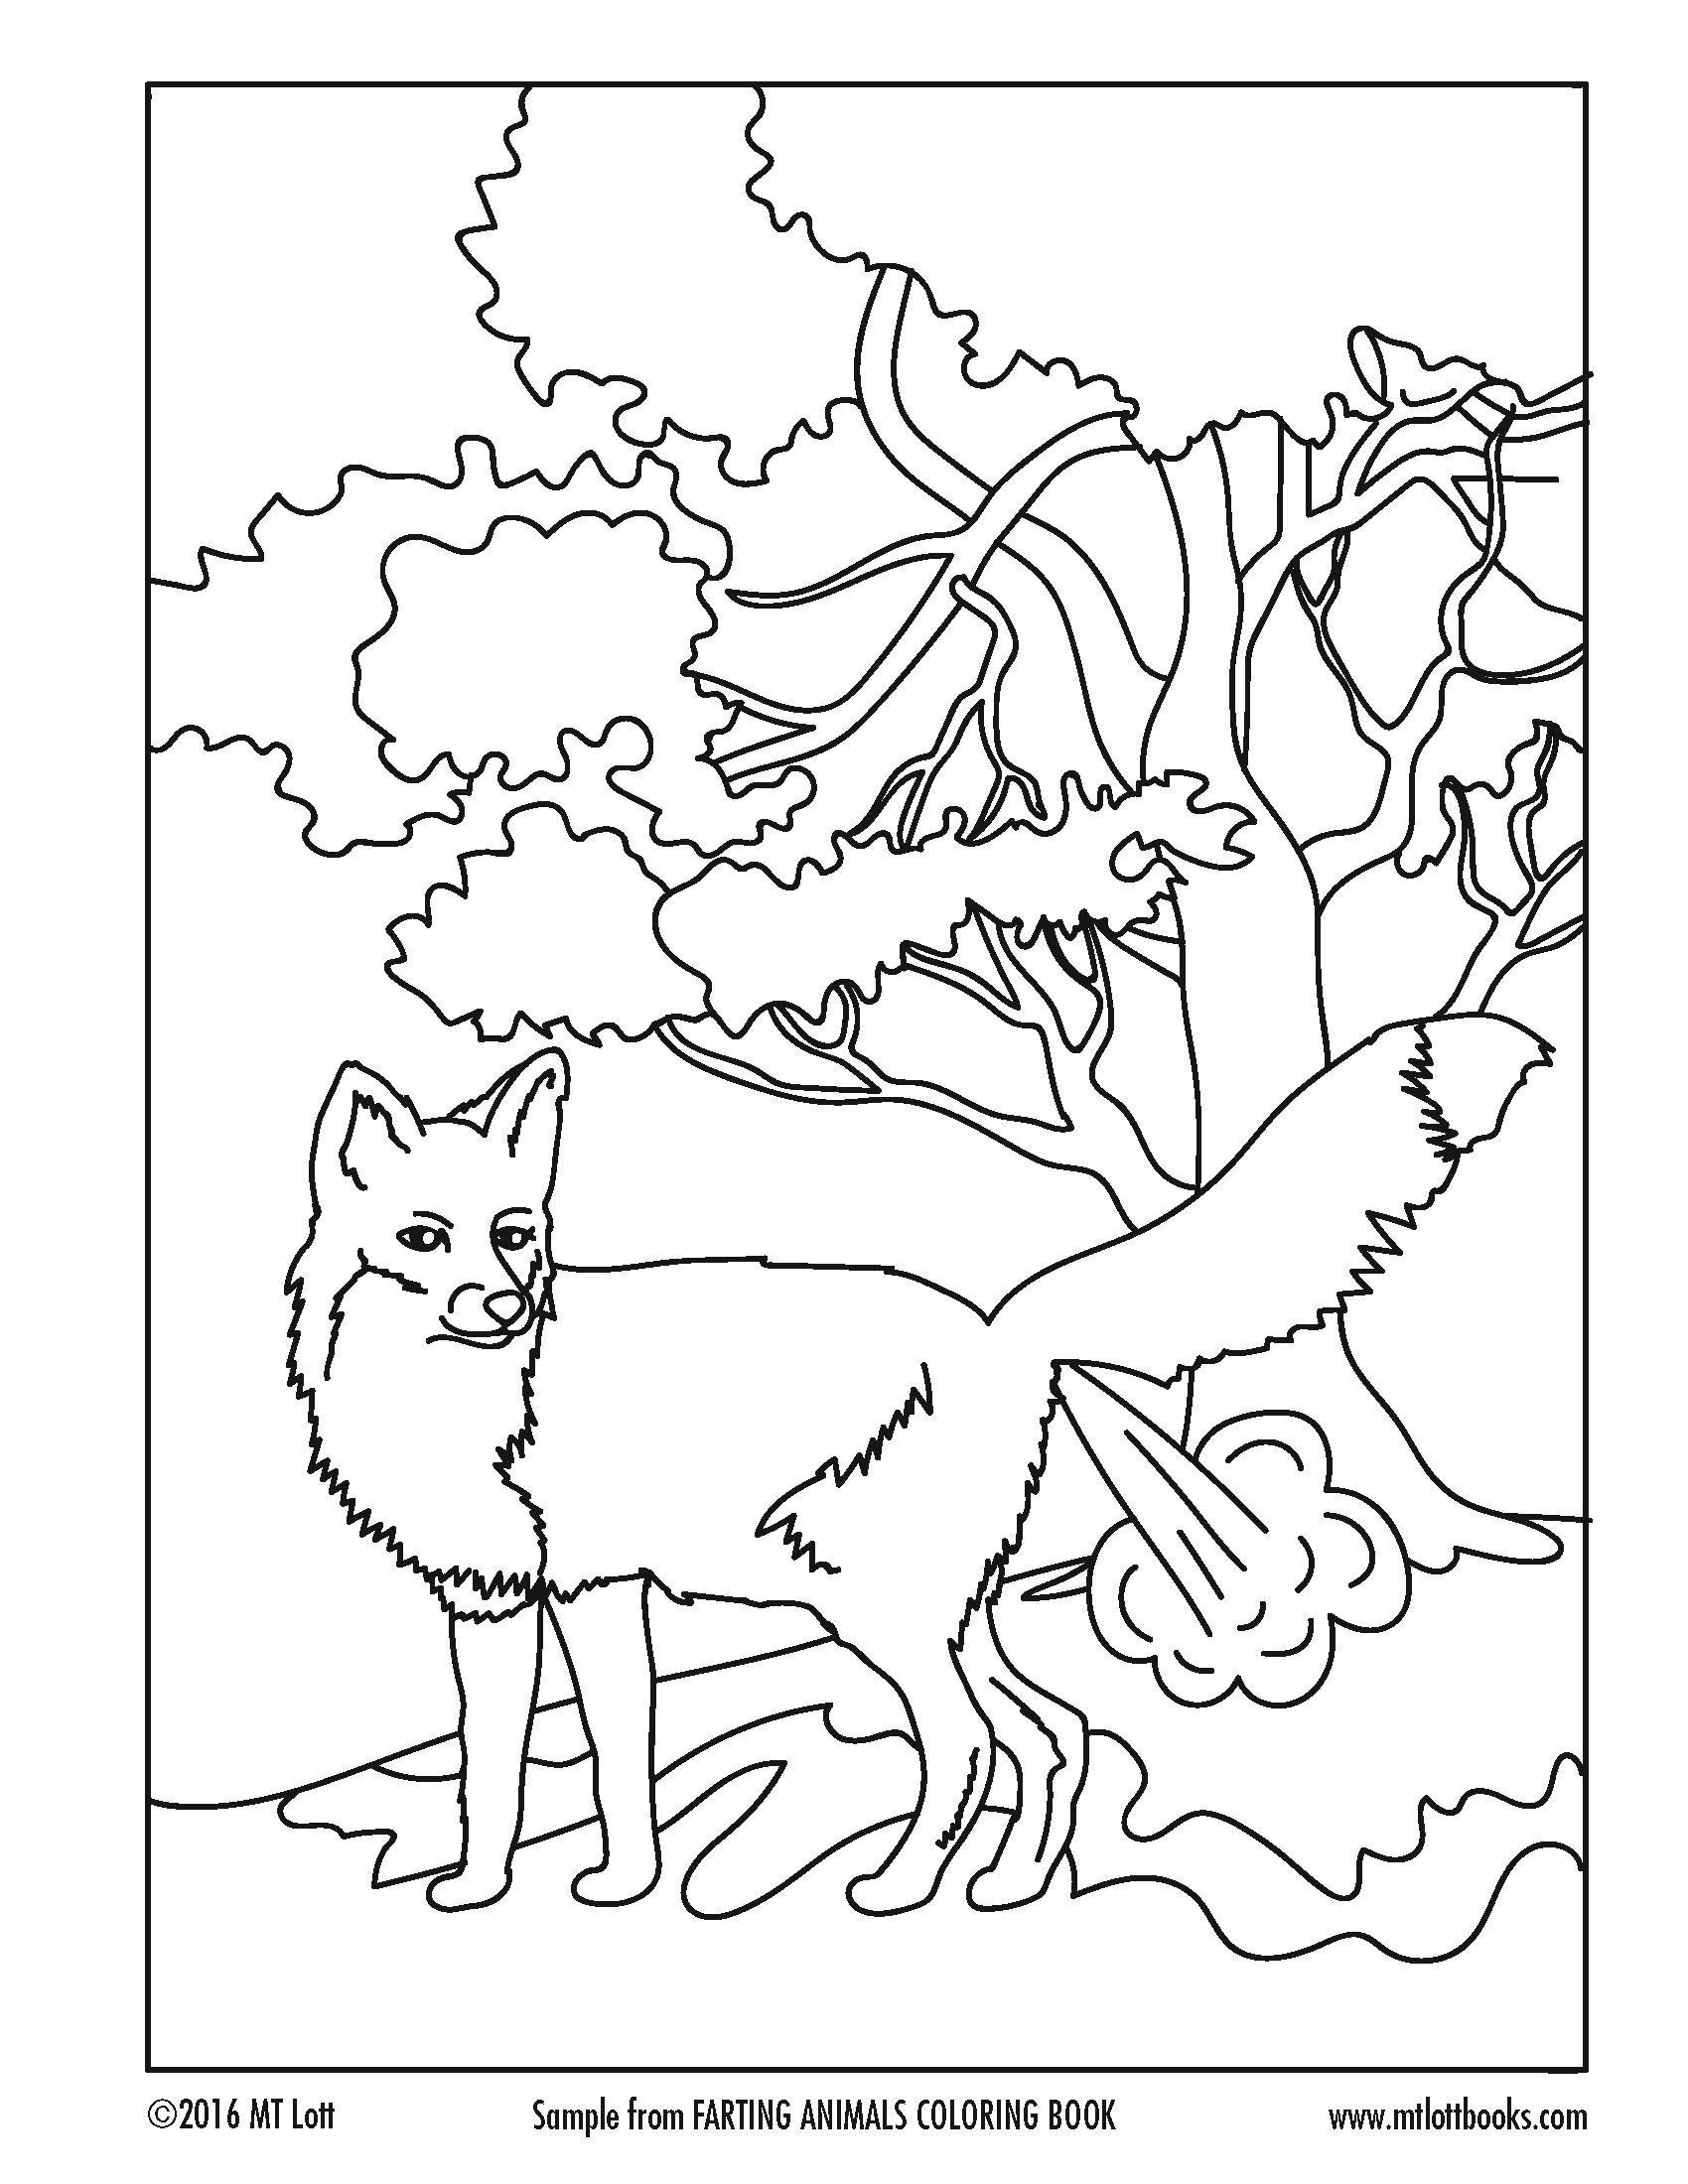 the Farting Animals Coloring Book Wallpaper